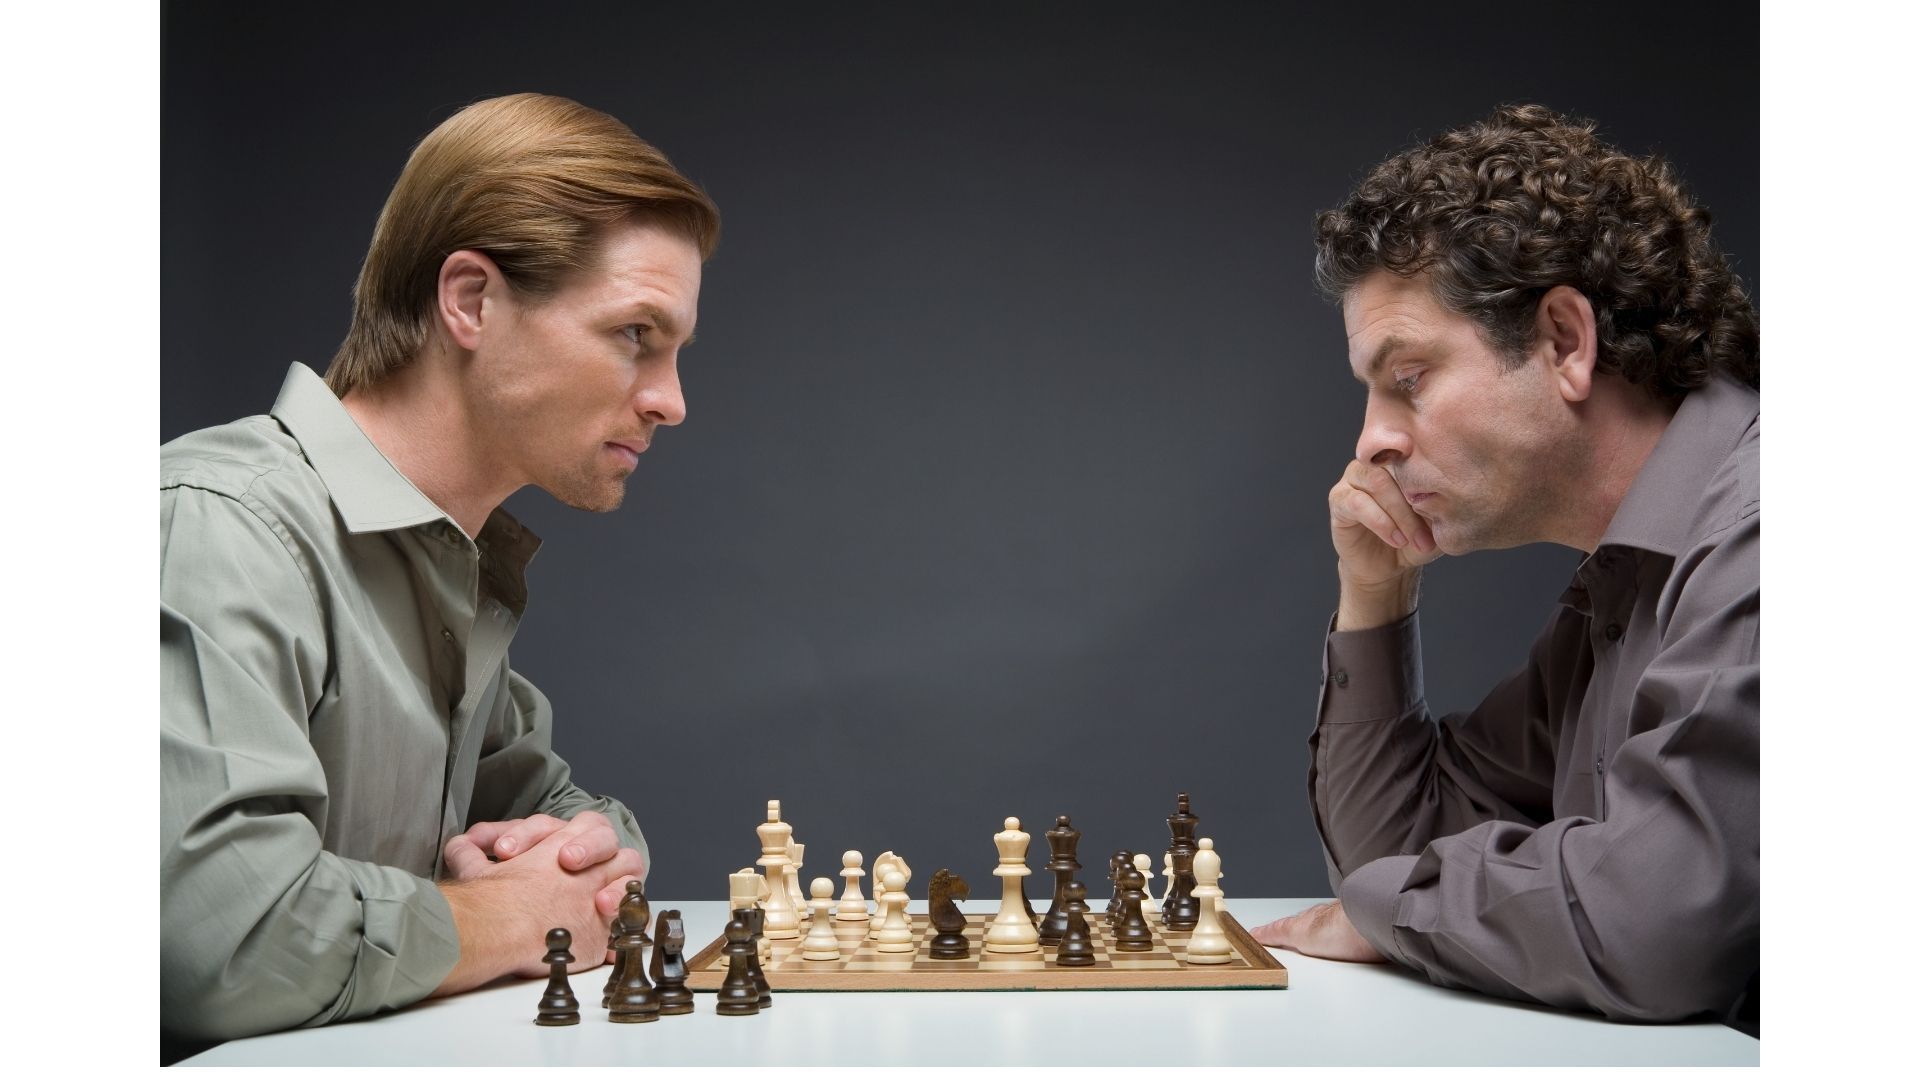 9 Benefits of Playing Chess: Plus Potential Downsides